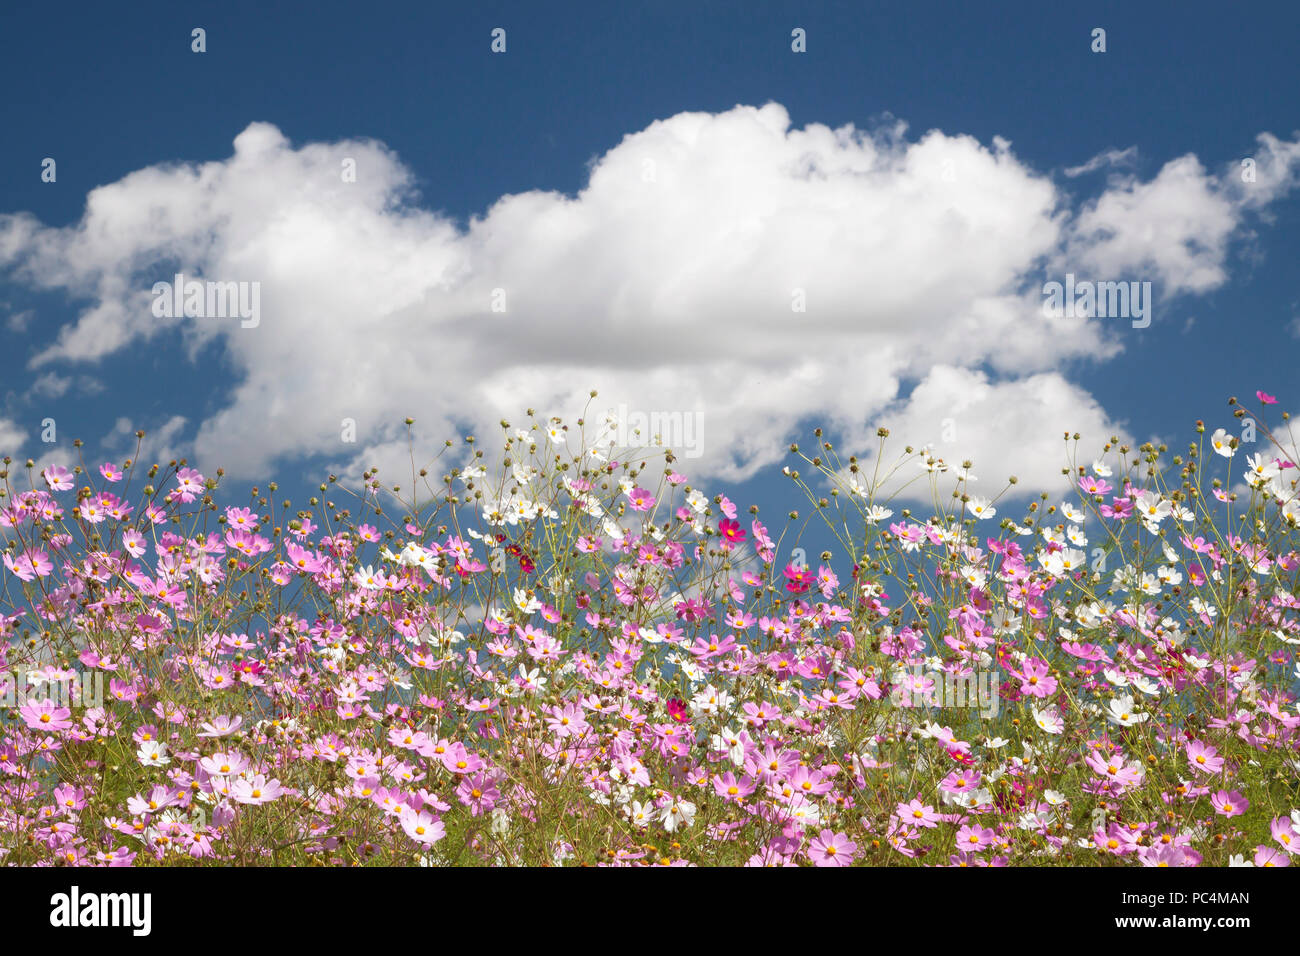 Cosmos flowers with clouds Stock Photo